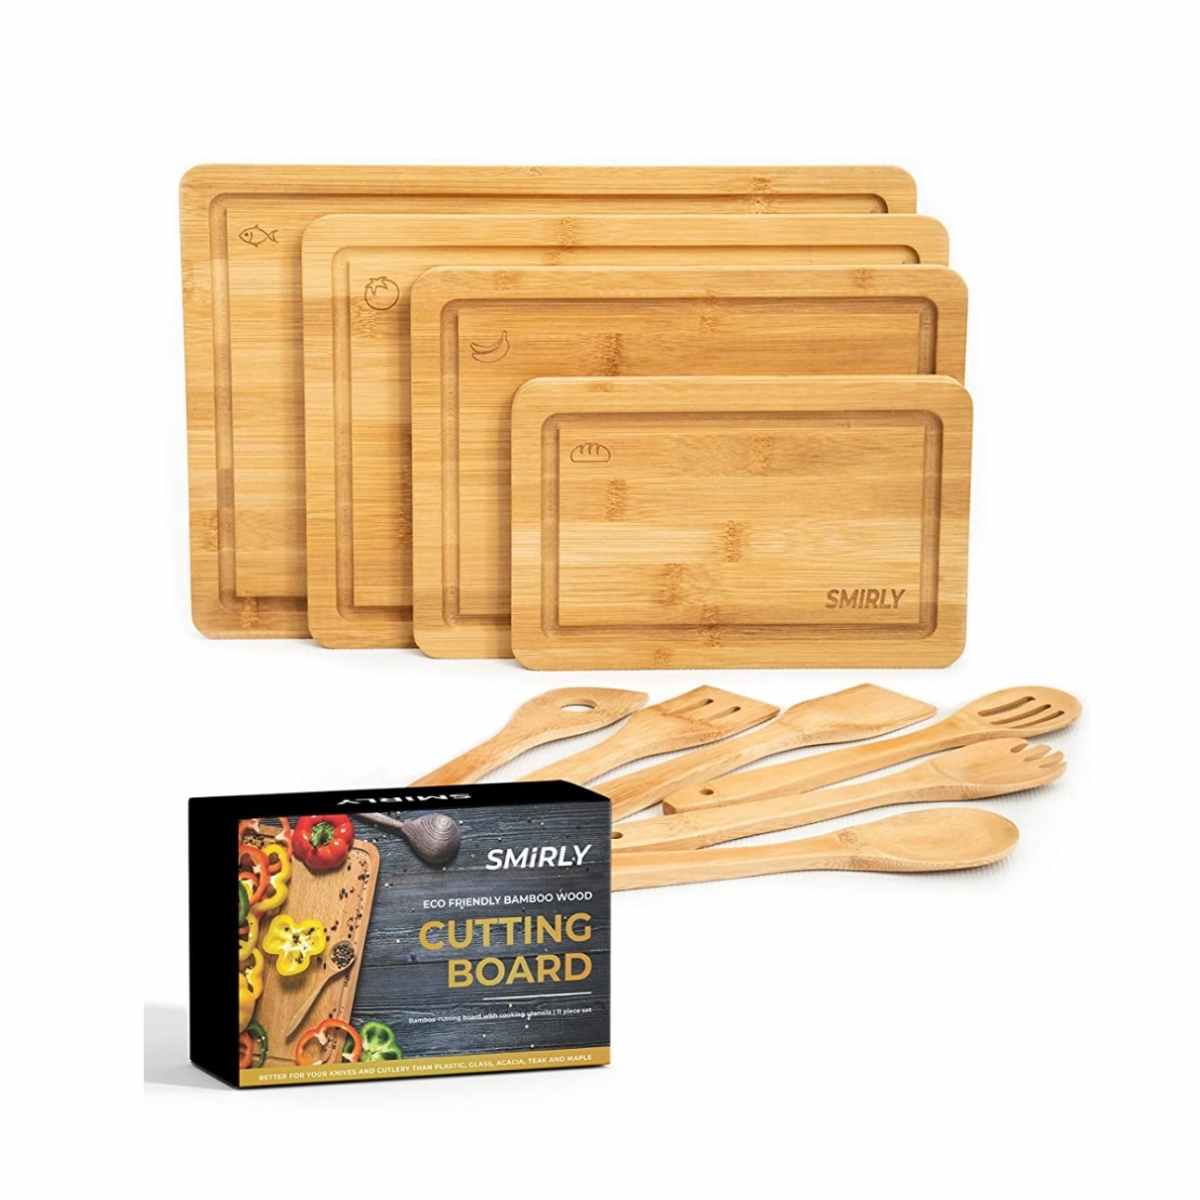 Smirly bamboo cutting board with 6 utensils